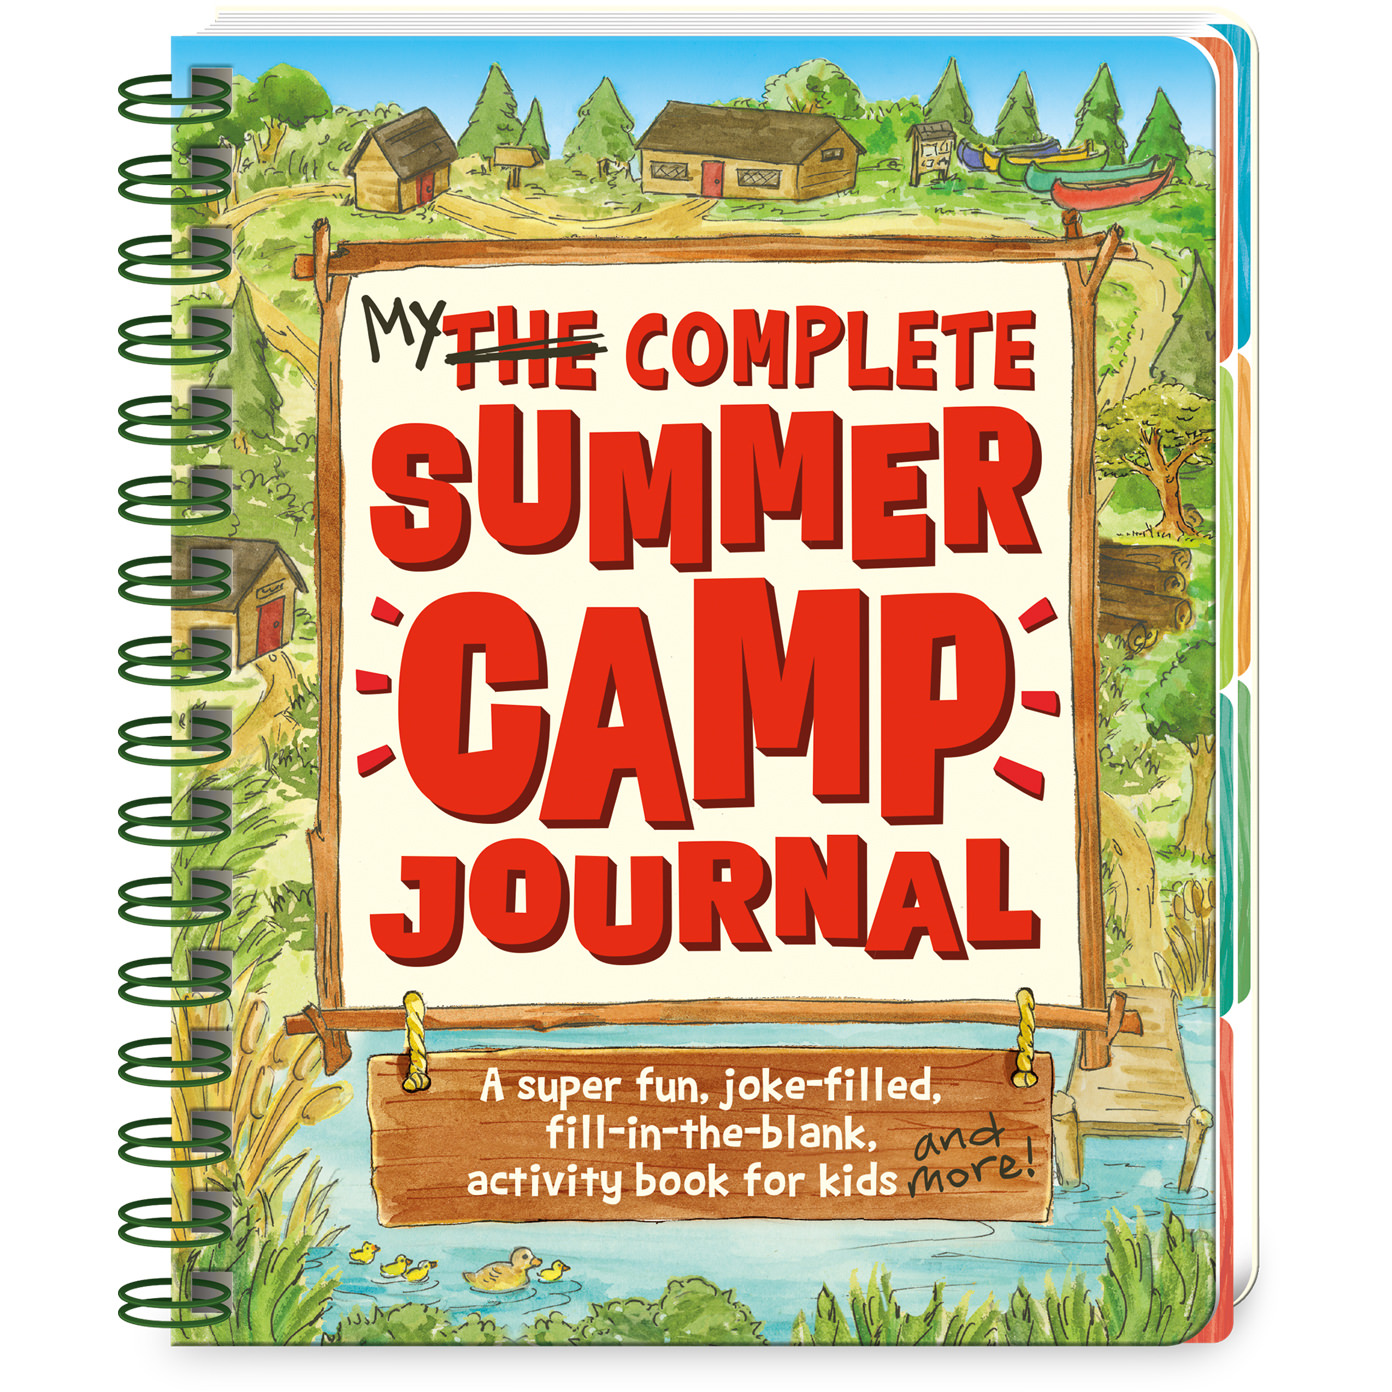 My summer book. My Summer book for Kids. My Summer Journal. Summer booklet for Kids. Summer Mini book for Kids.